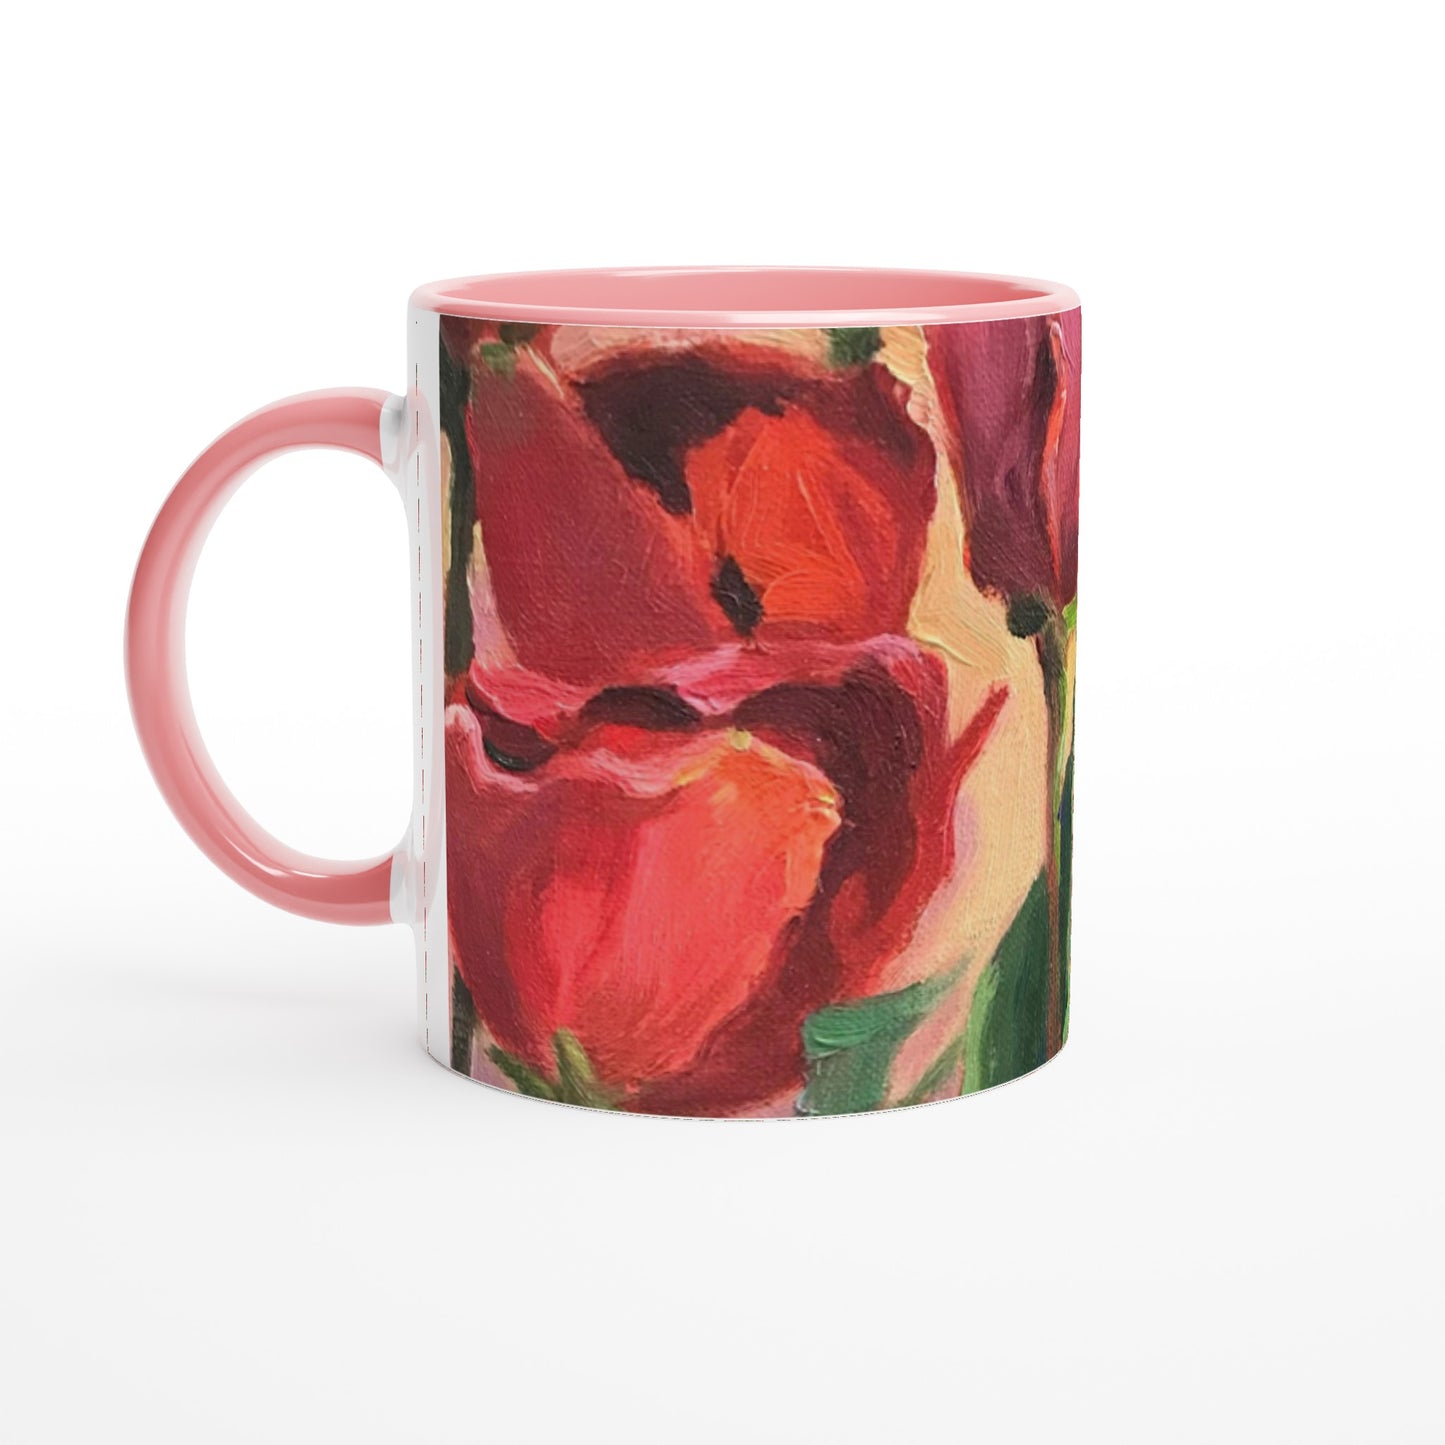 "Tulips" Floral White 11oz Ceramic Mug with Color Inside by Barbara Cleary Designs